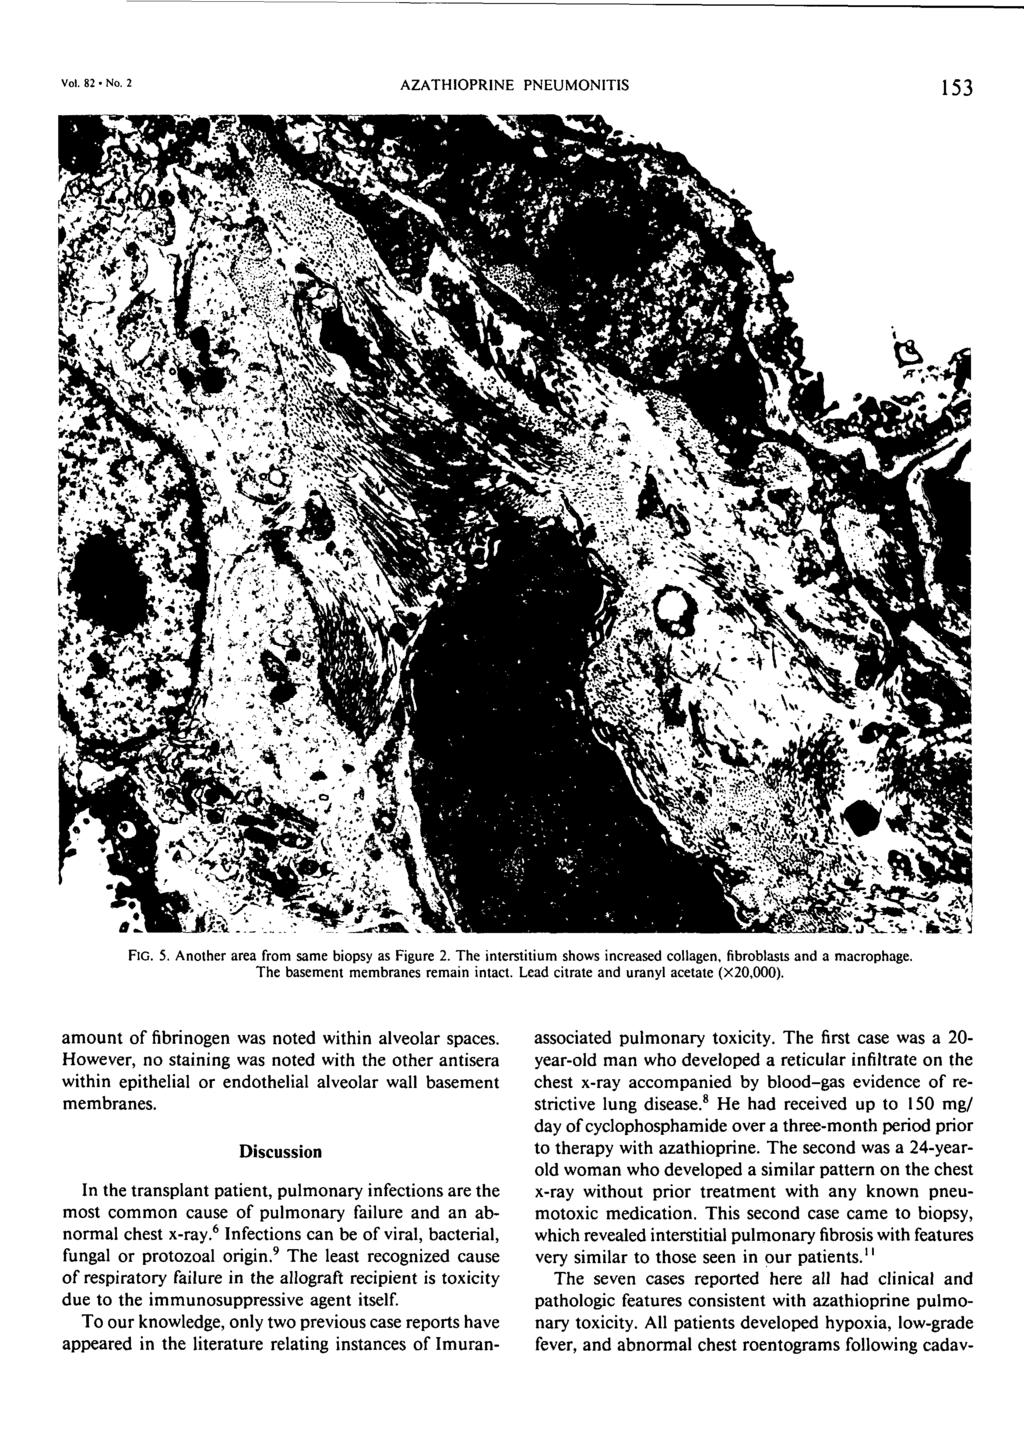 AZATHIOPR1NE PNEUMONITIS Vol. 82 No. 2 153 FIG. 5. Another area from same biopsy as Figure 2. The interstitium shows increased collagen,fibroblastsand a macrophage.